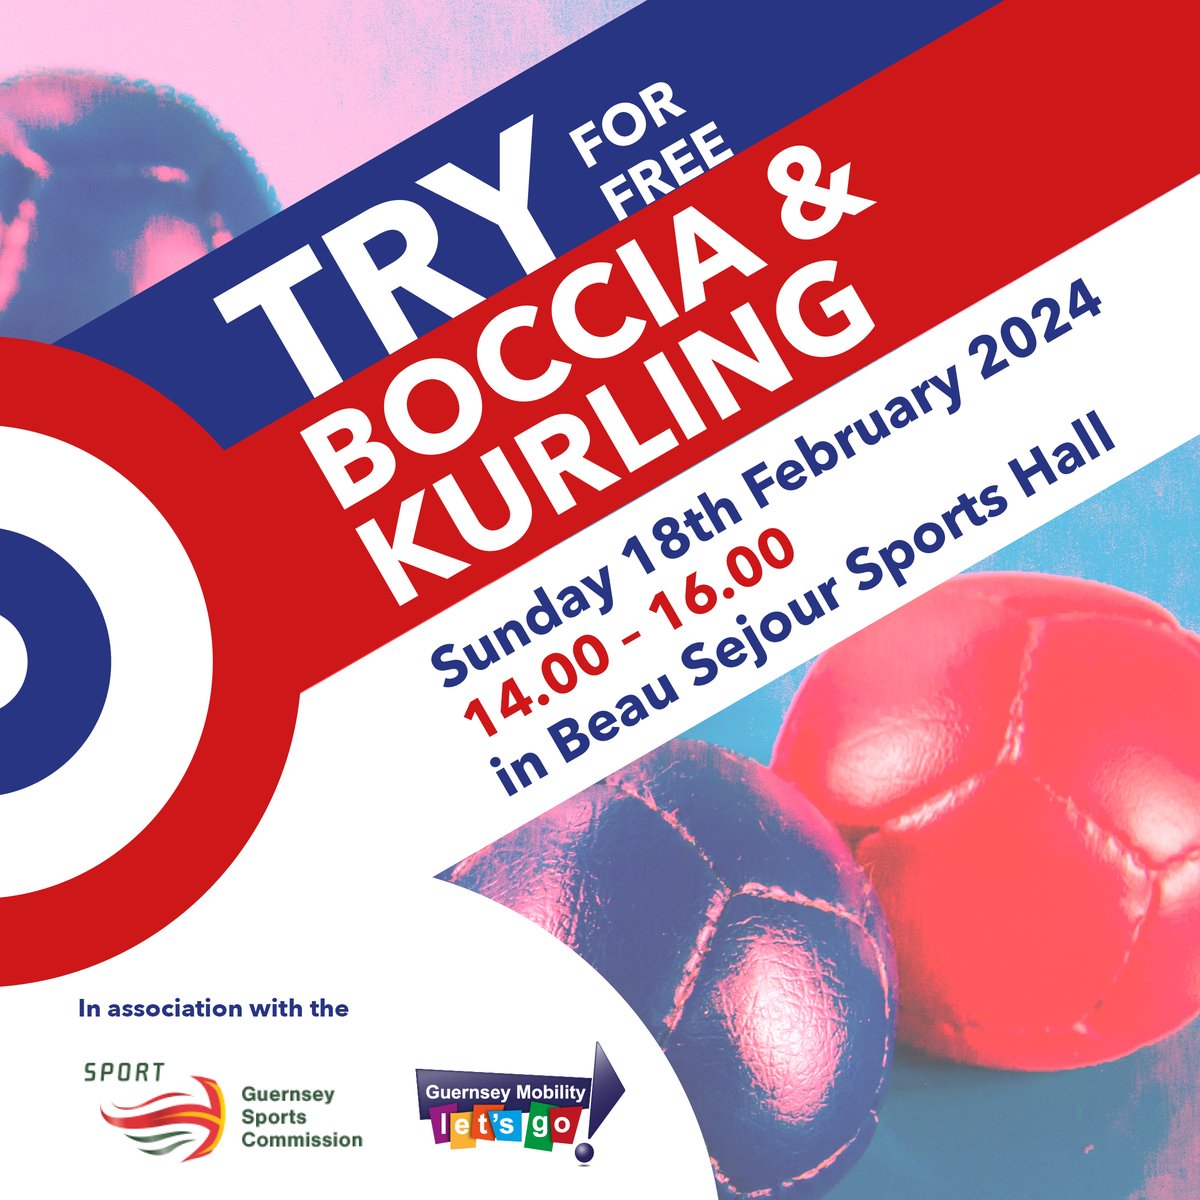 Don't forget our FREE boccia and kurling session on Sunday. Bring the whole family along 👇😀